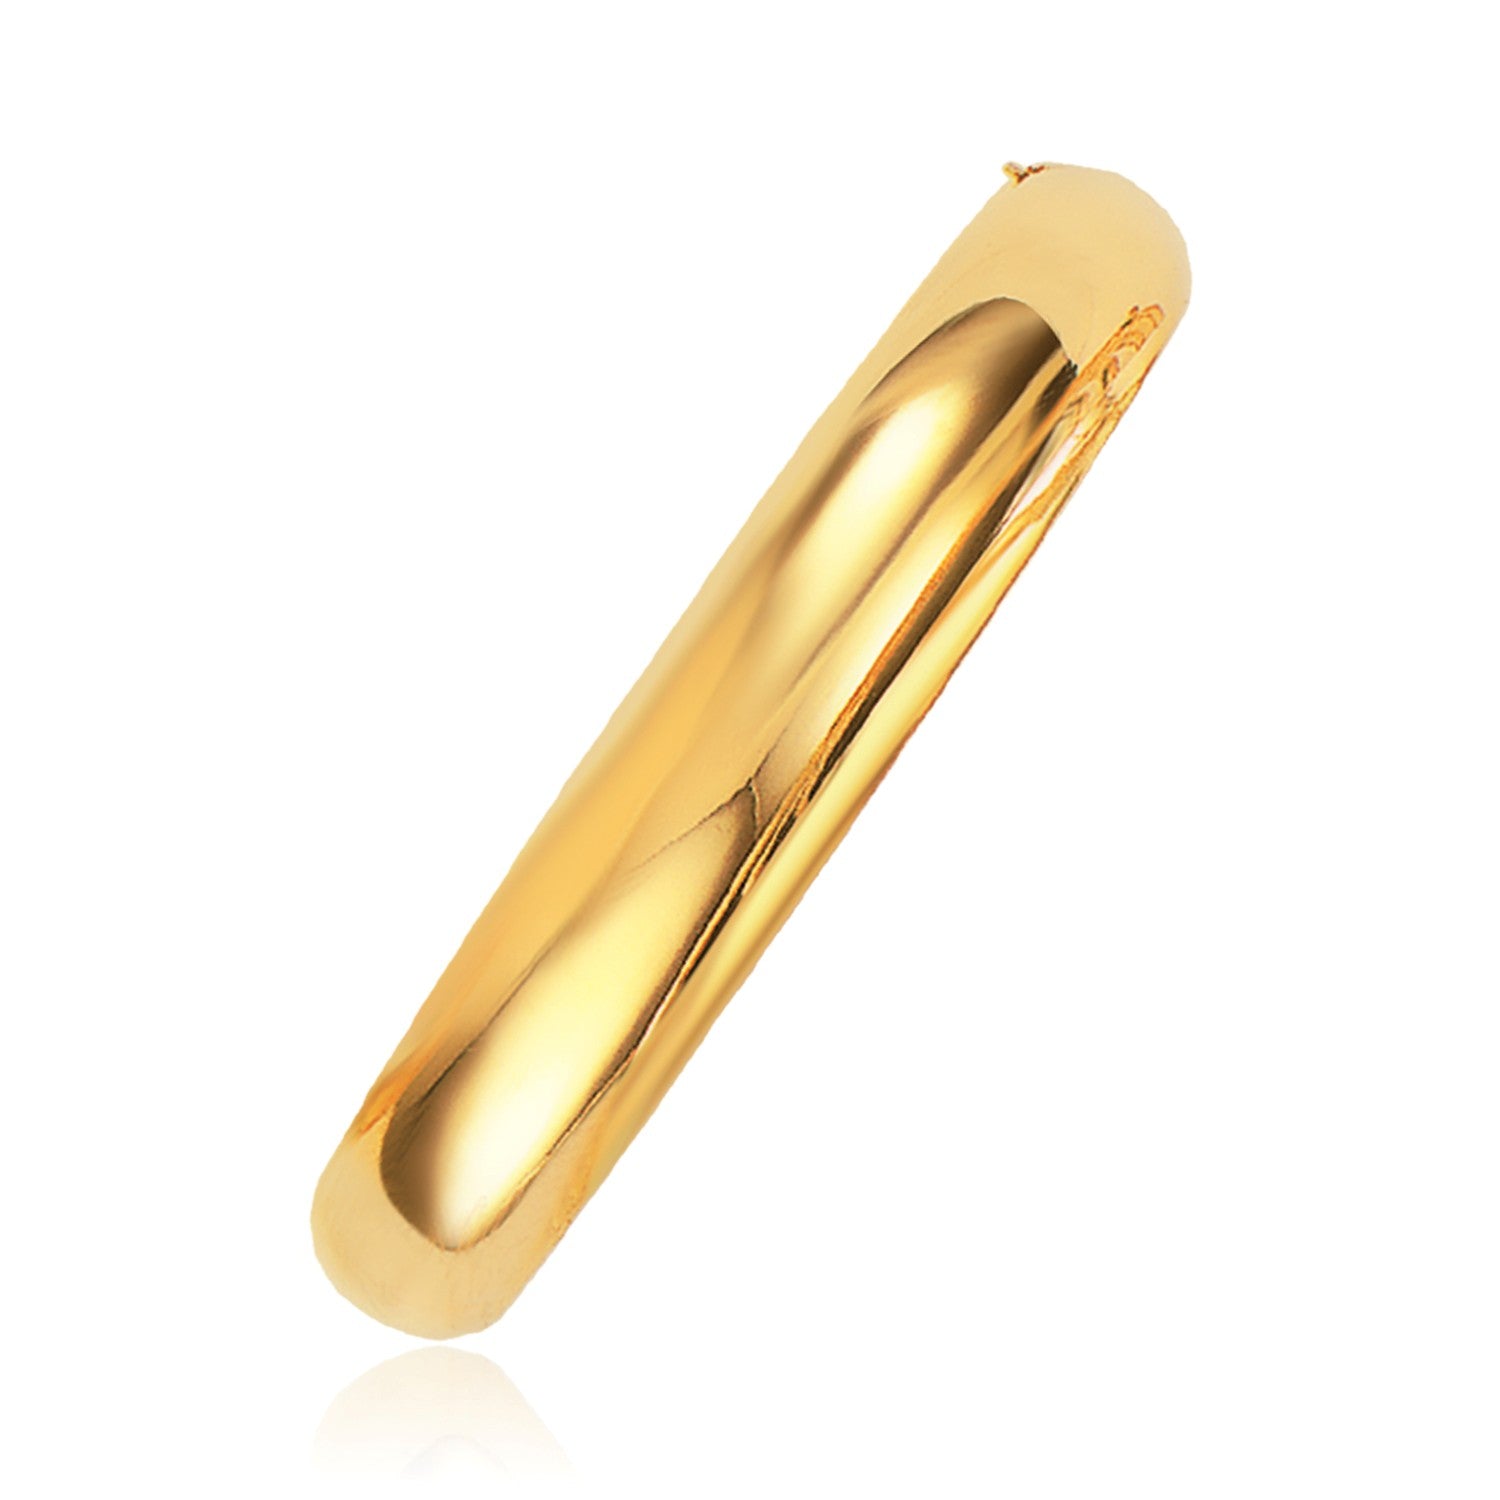 Classic Bangle in 14k Yellow Gold (10.0mm)